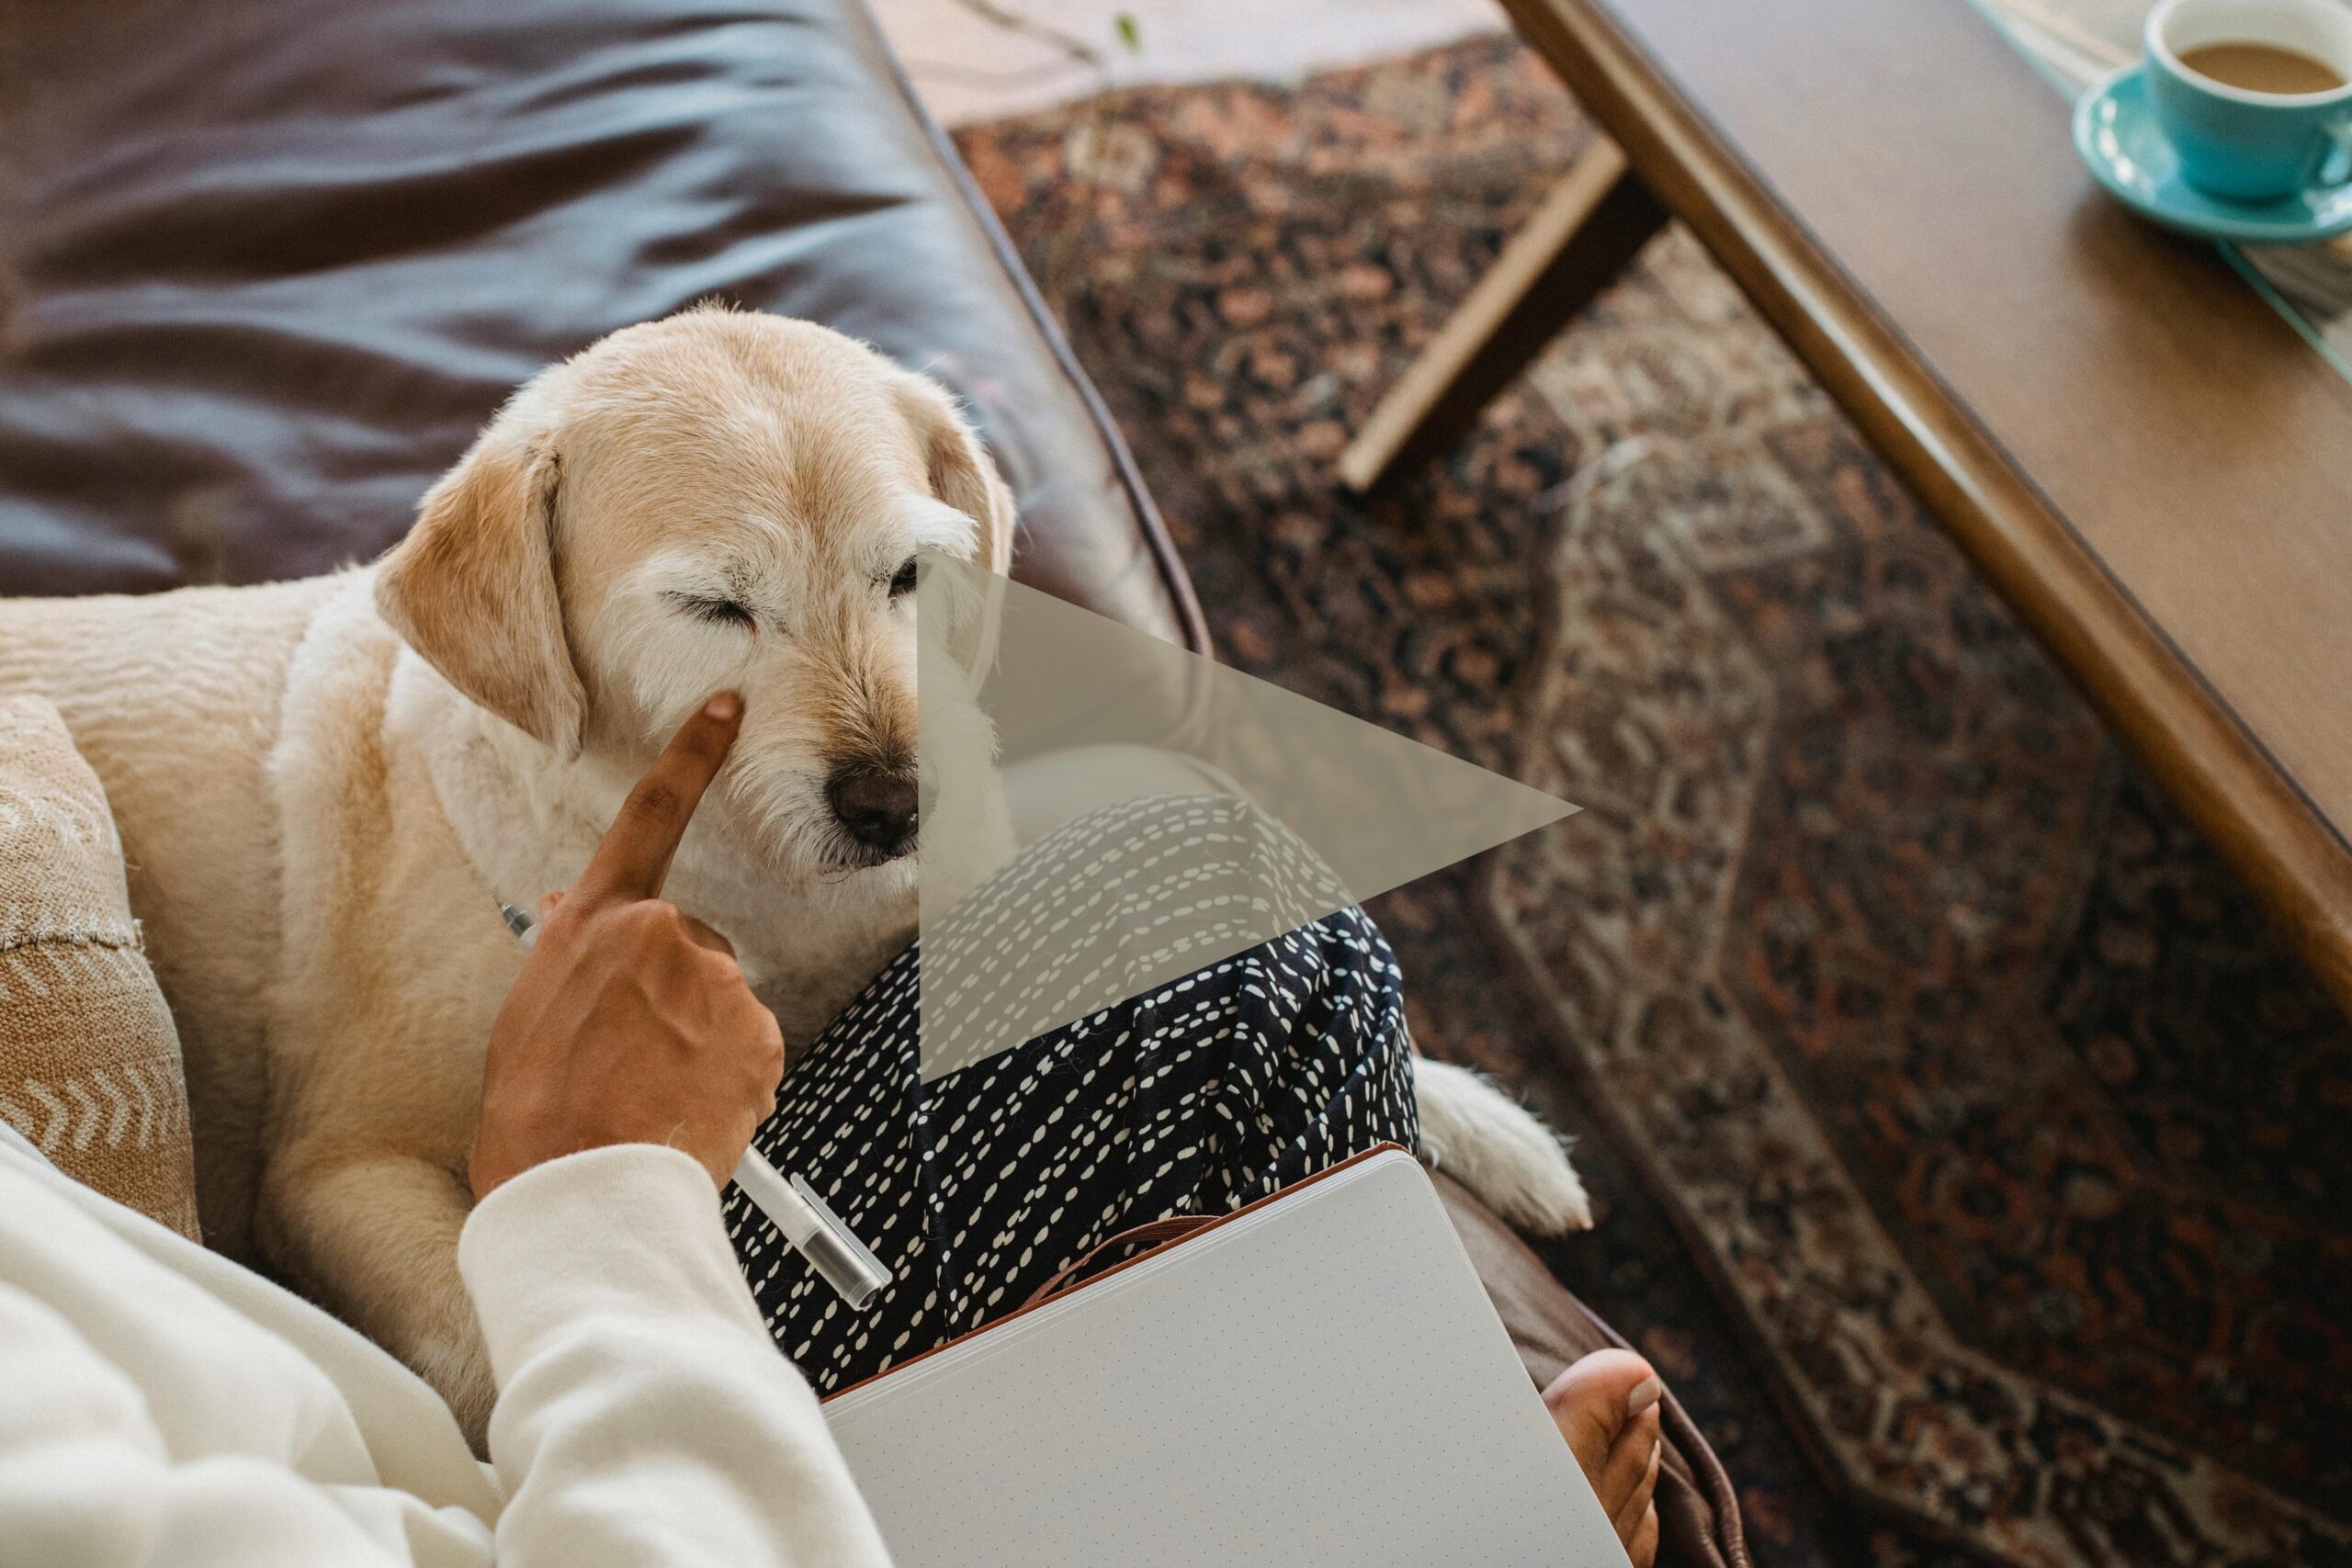 Dog and owner on couch with open notebook